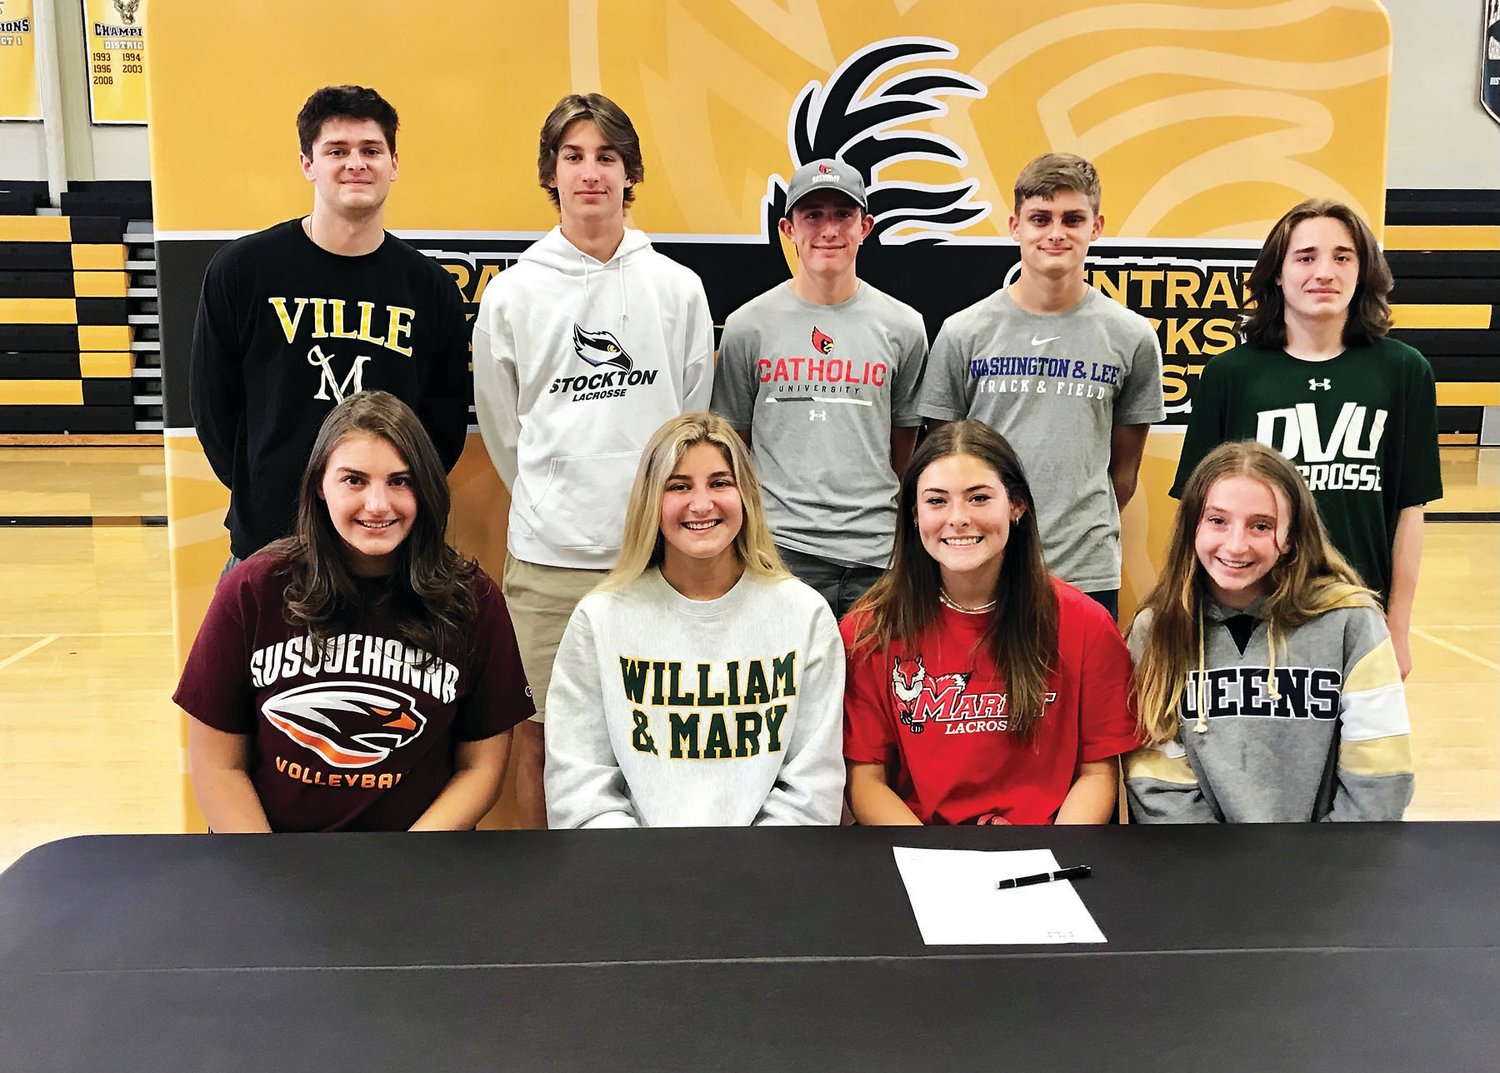 CB West recently recognized several seniors for committing to continue their sport at the collegiate level. From left are: front row, Brianna Livezey, Paige Gilbert, Shelby Hahn, Carlin McFadden; back row, Teddy Spratt, Connor Albrecht, Conor Gross, Jack Foster and Cole Graeff.